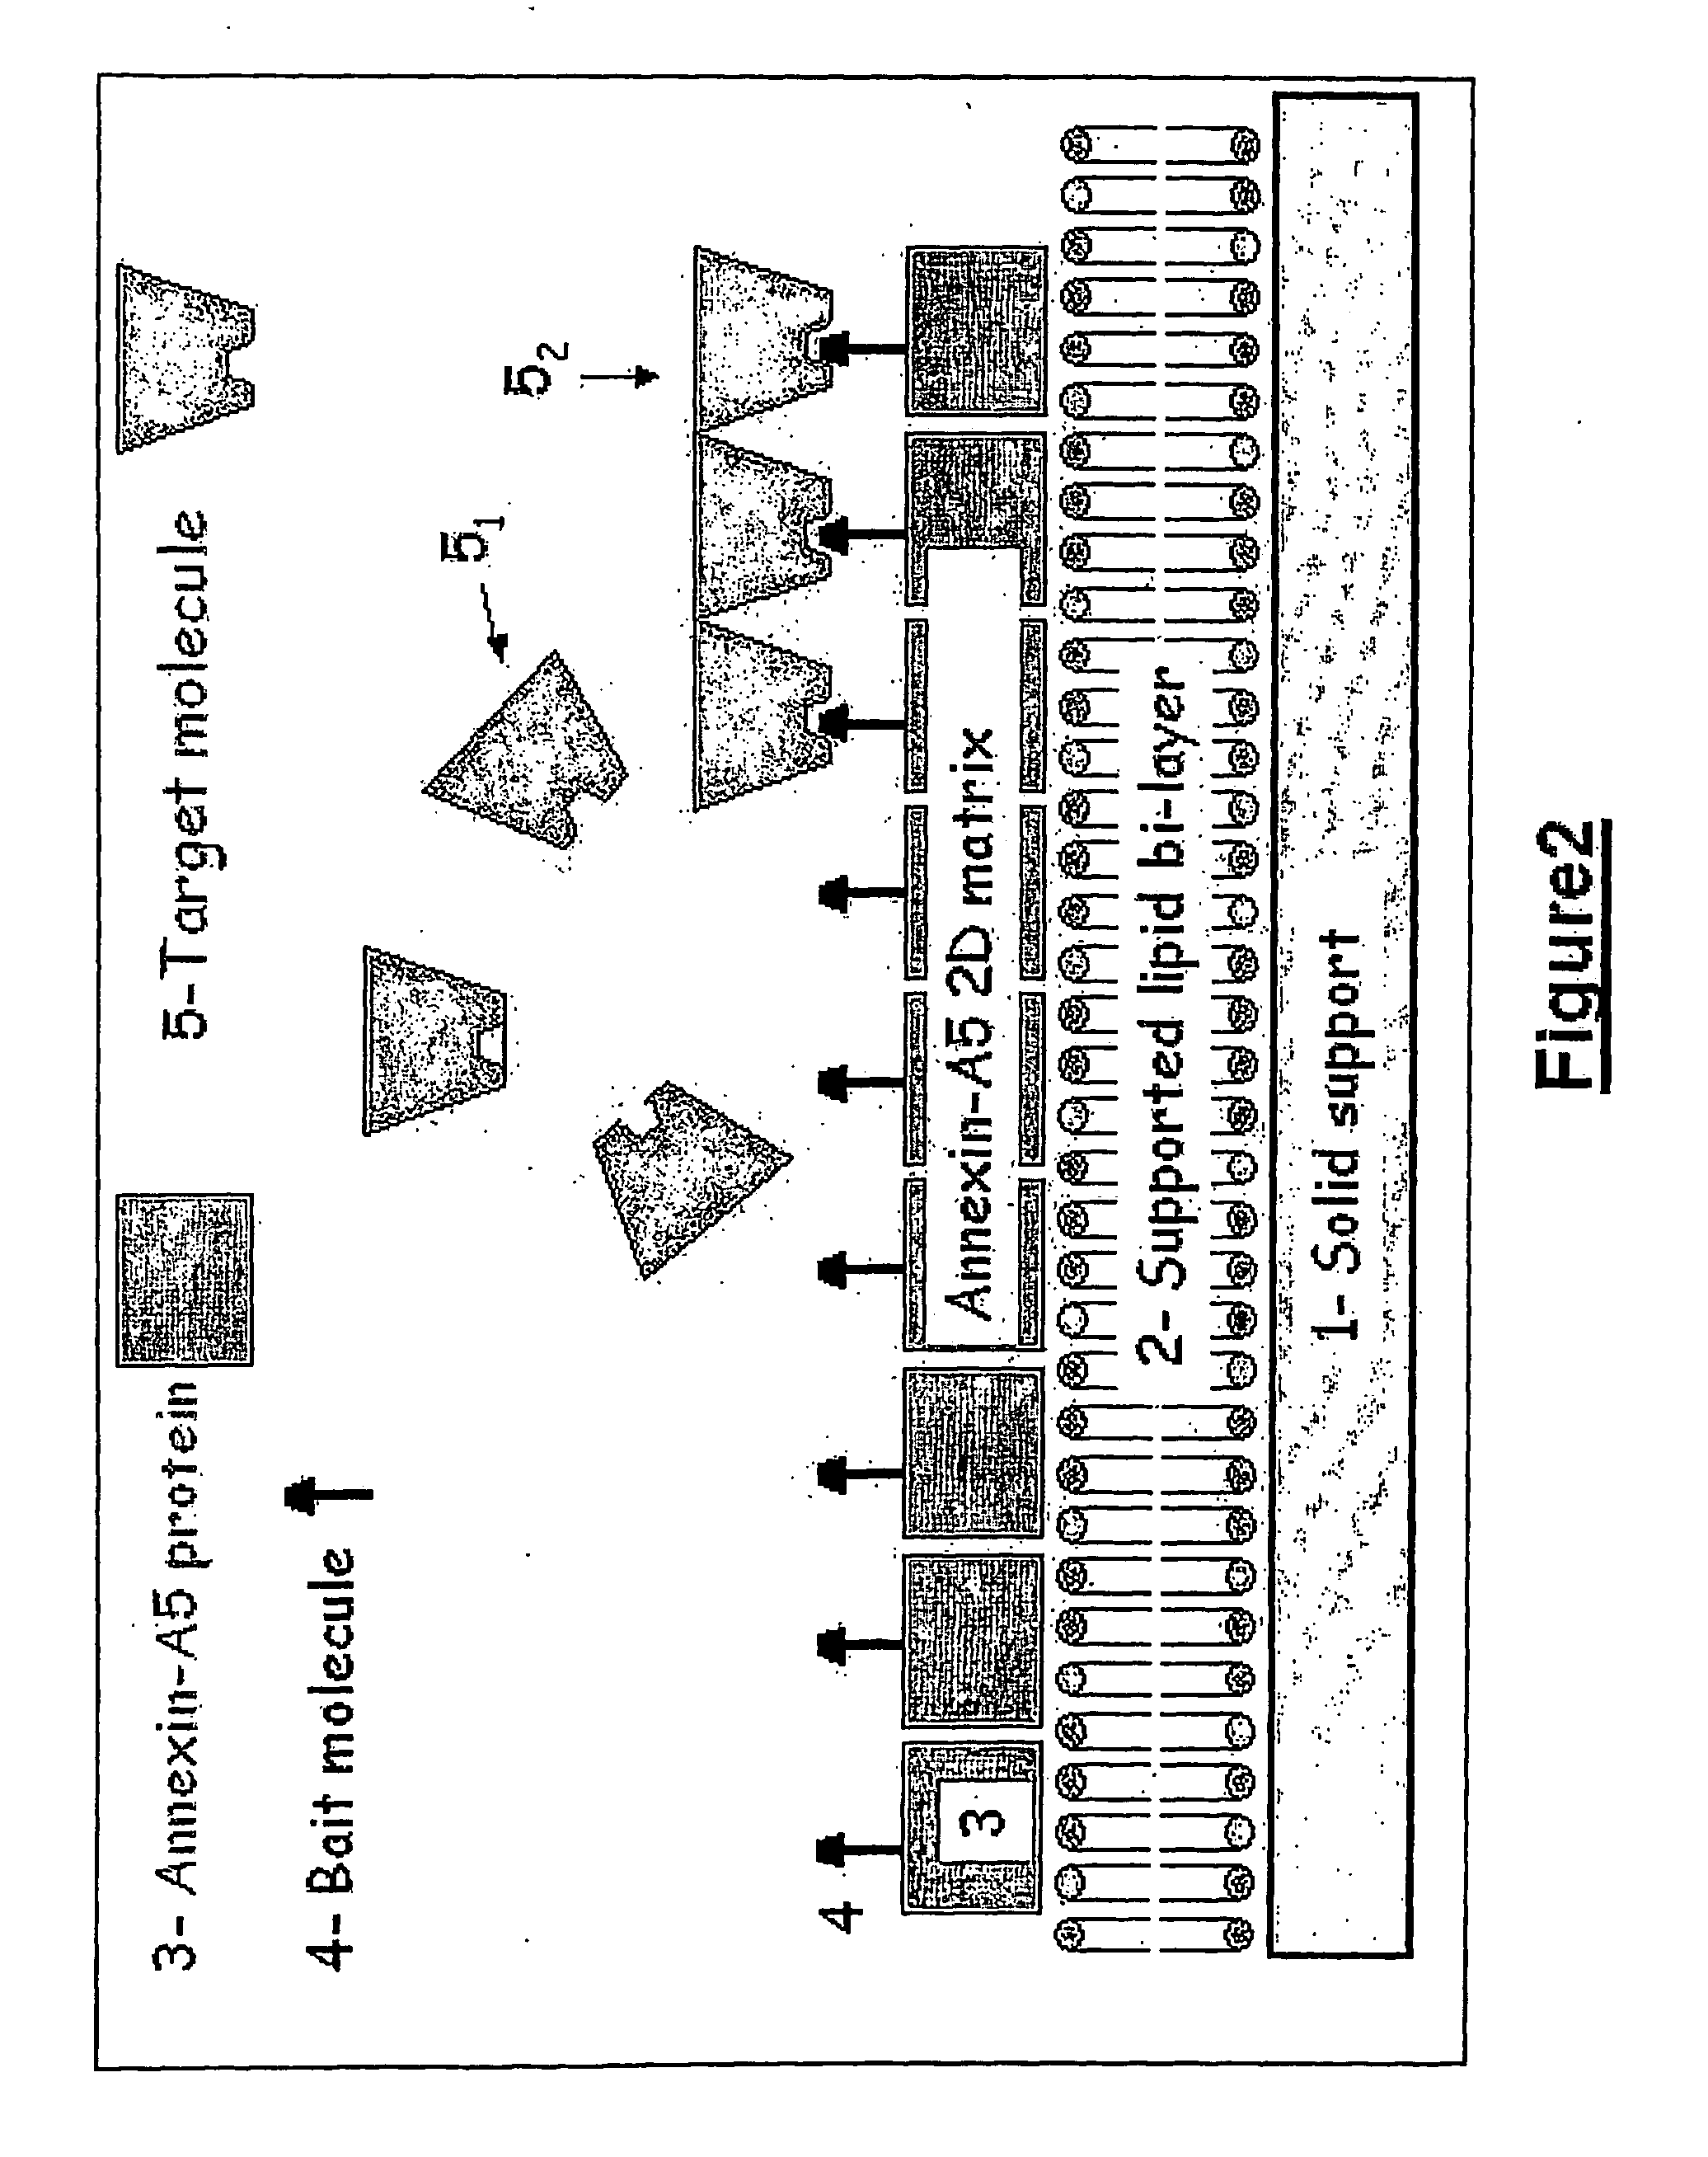 Device for binding a target entity to a bait entity and detection methods using the same